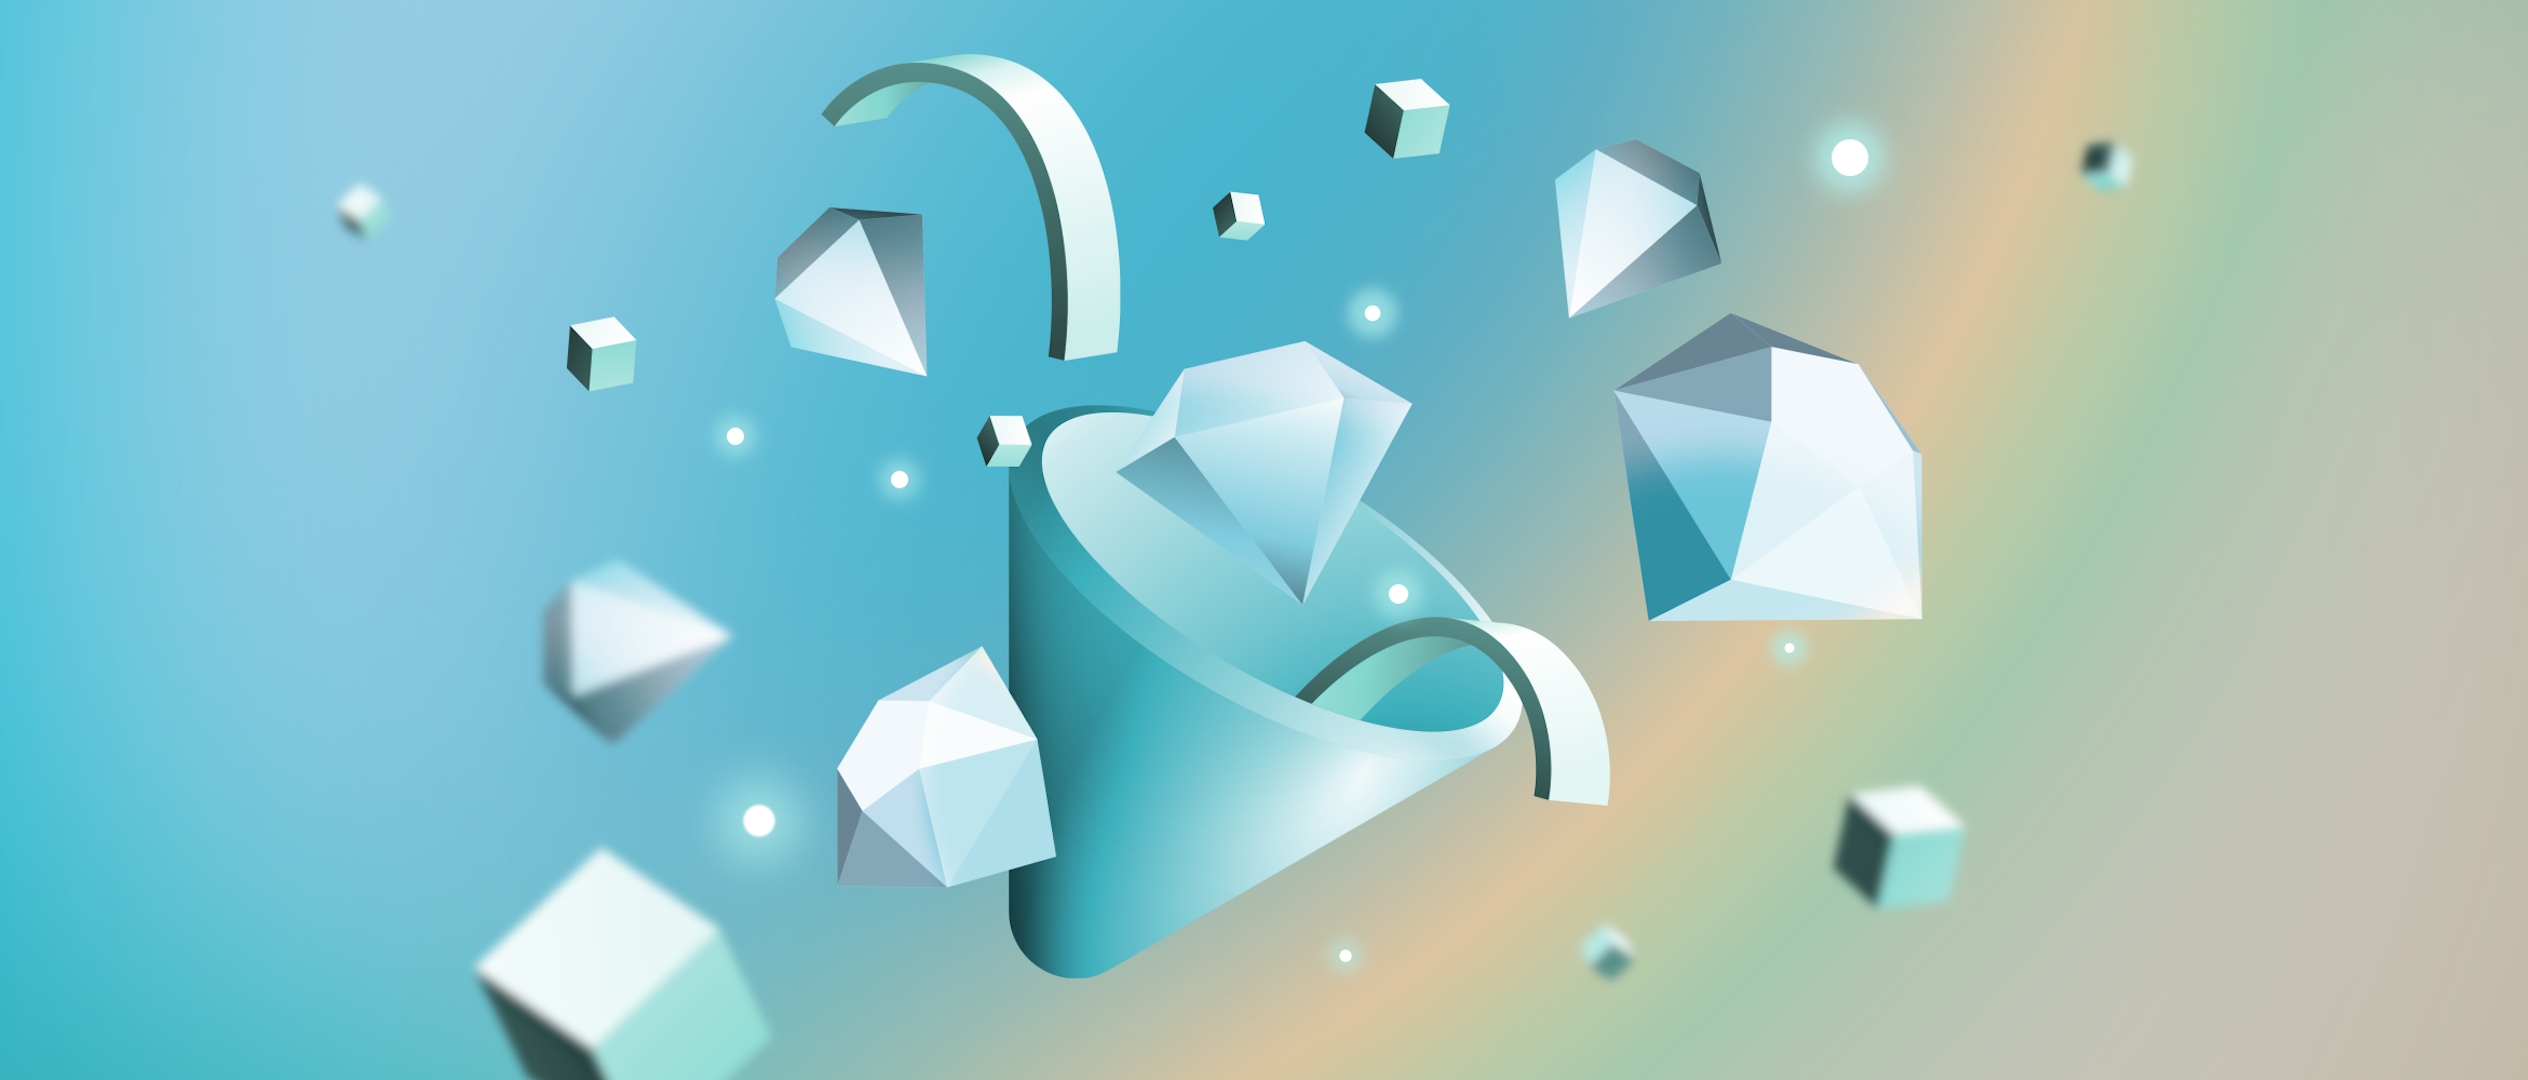 Tiny gems: a celebration of recent improvements in Sketch